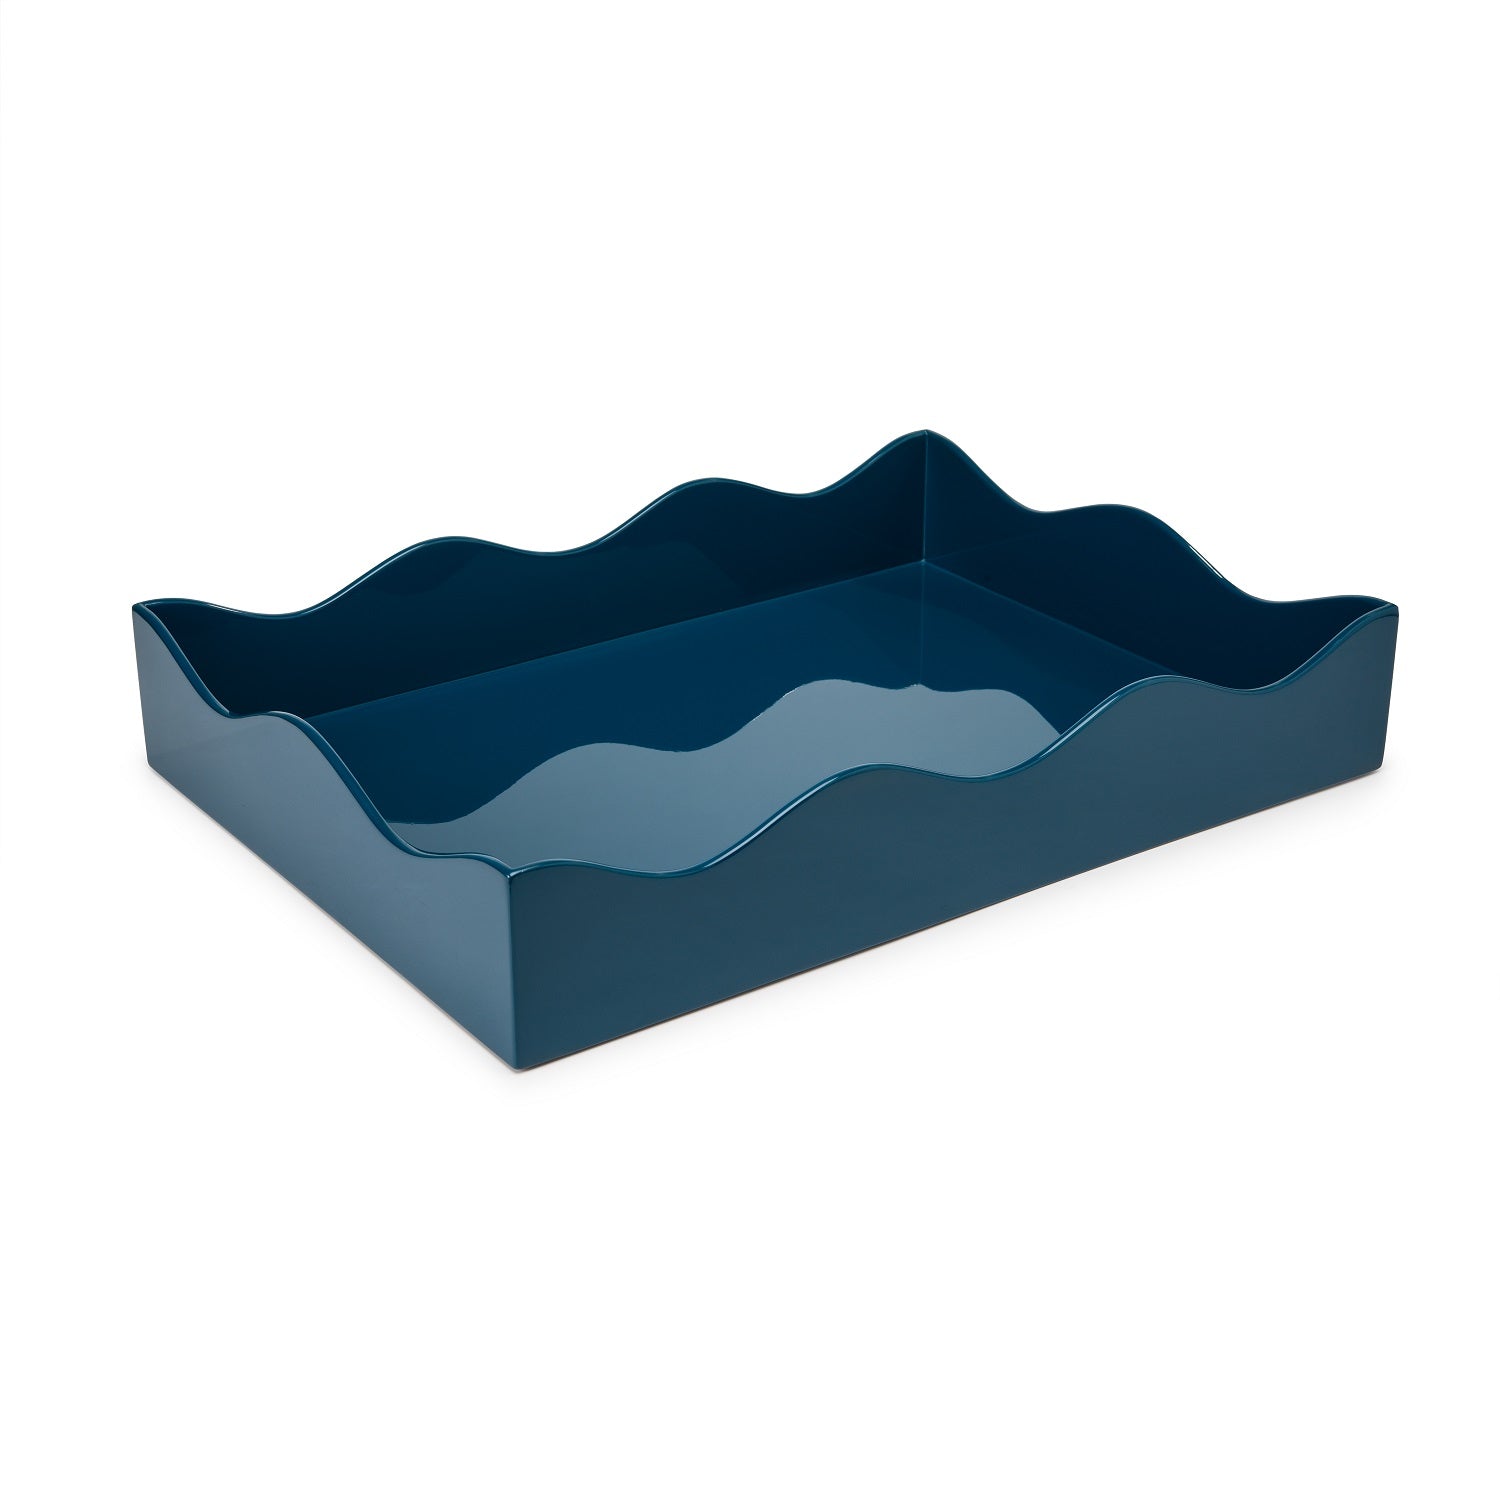 Large Lacquer Tray, Marine Blue, by The Lacquer Company